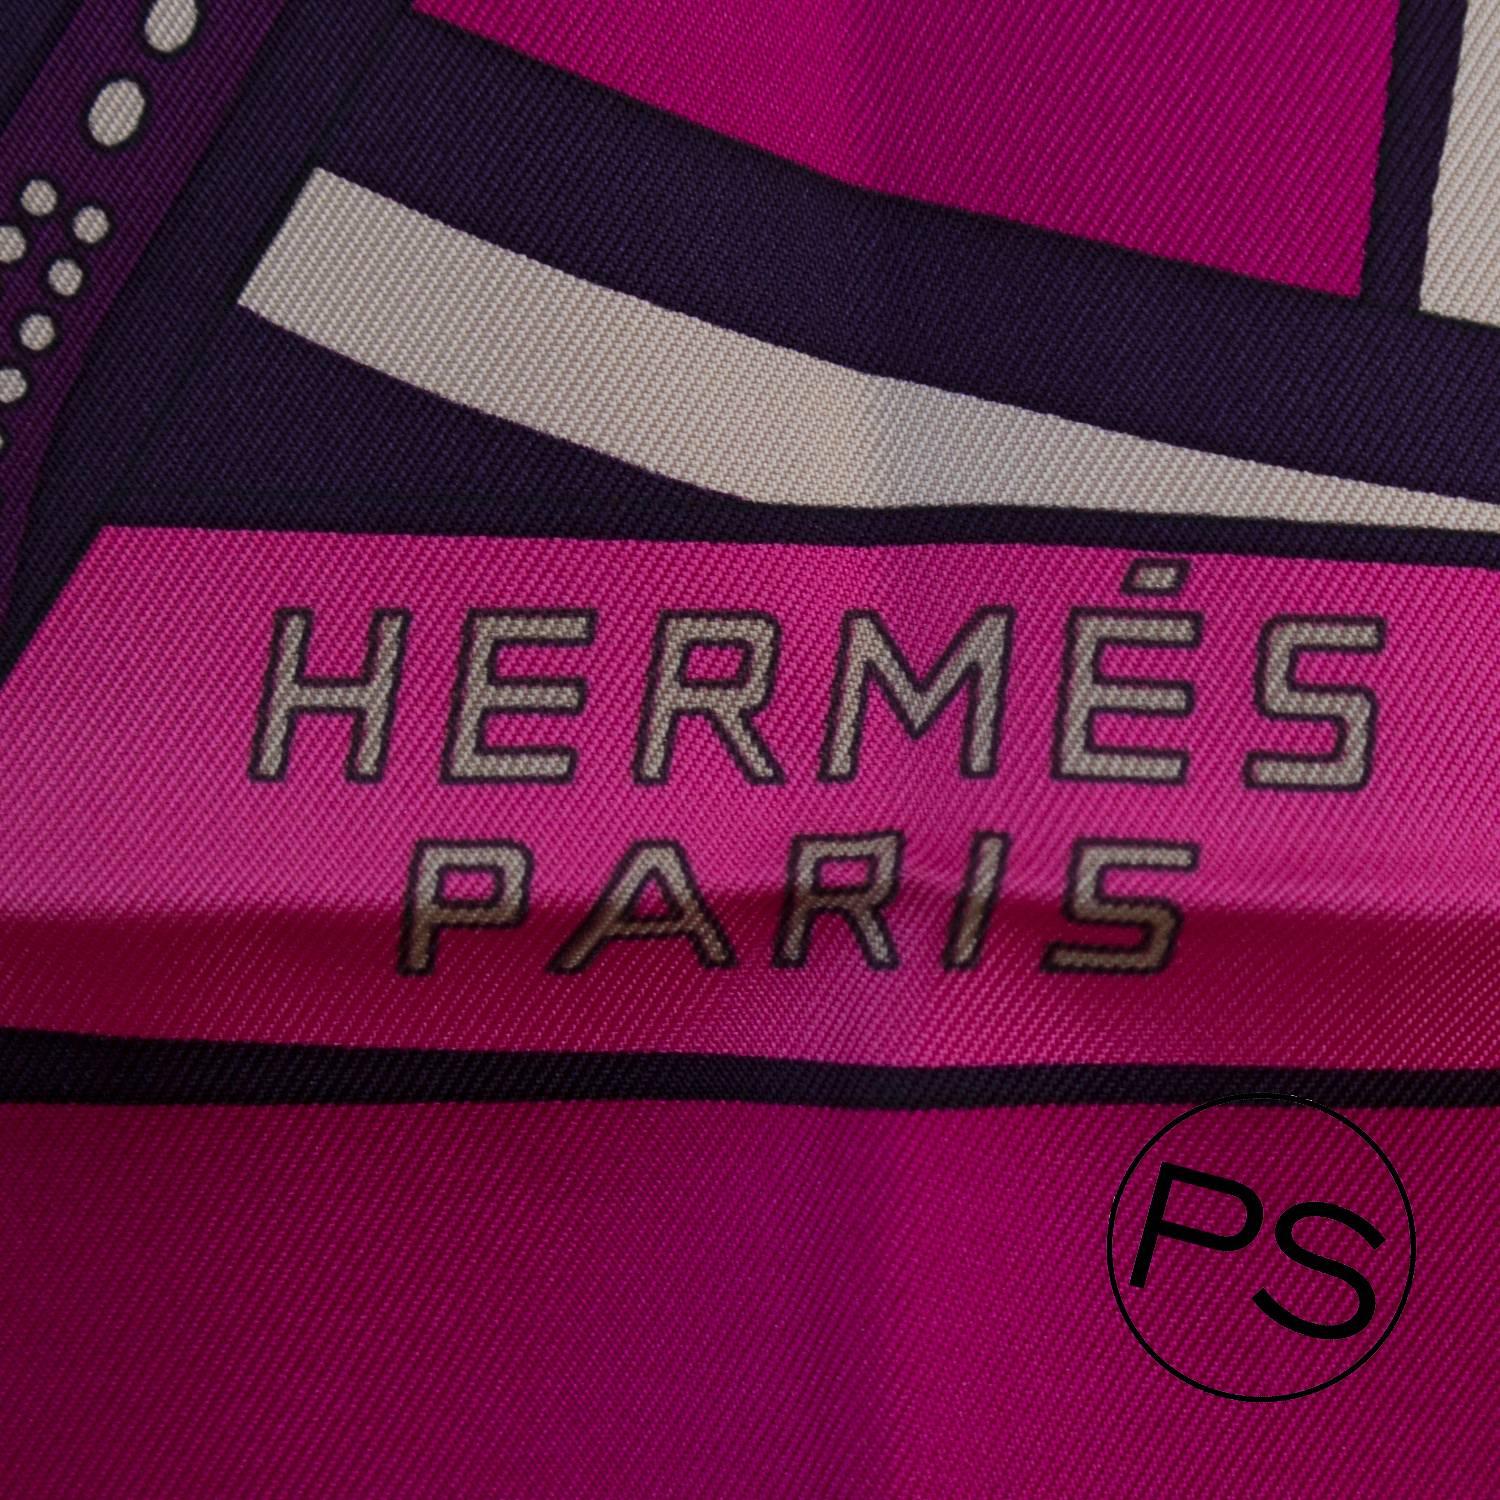 Hermes Carre 100% Silk Balade en Berline Fuchsia, Green, Violet 2015.

Bought it in hermès store in 2015.

Pre-owned and never used

100% Silk

Size; 90cm

Color;  FUCHSIA/VERT/VIOLET

Model:Balade en Berline

Details:
*Protective